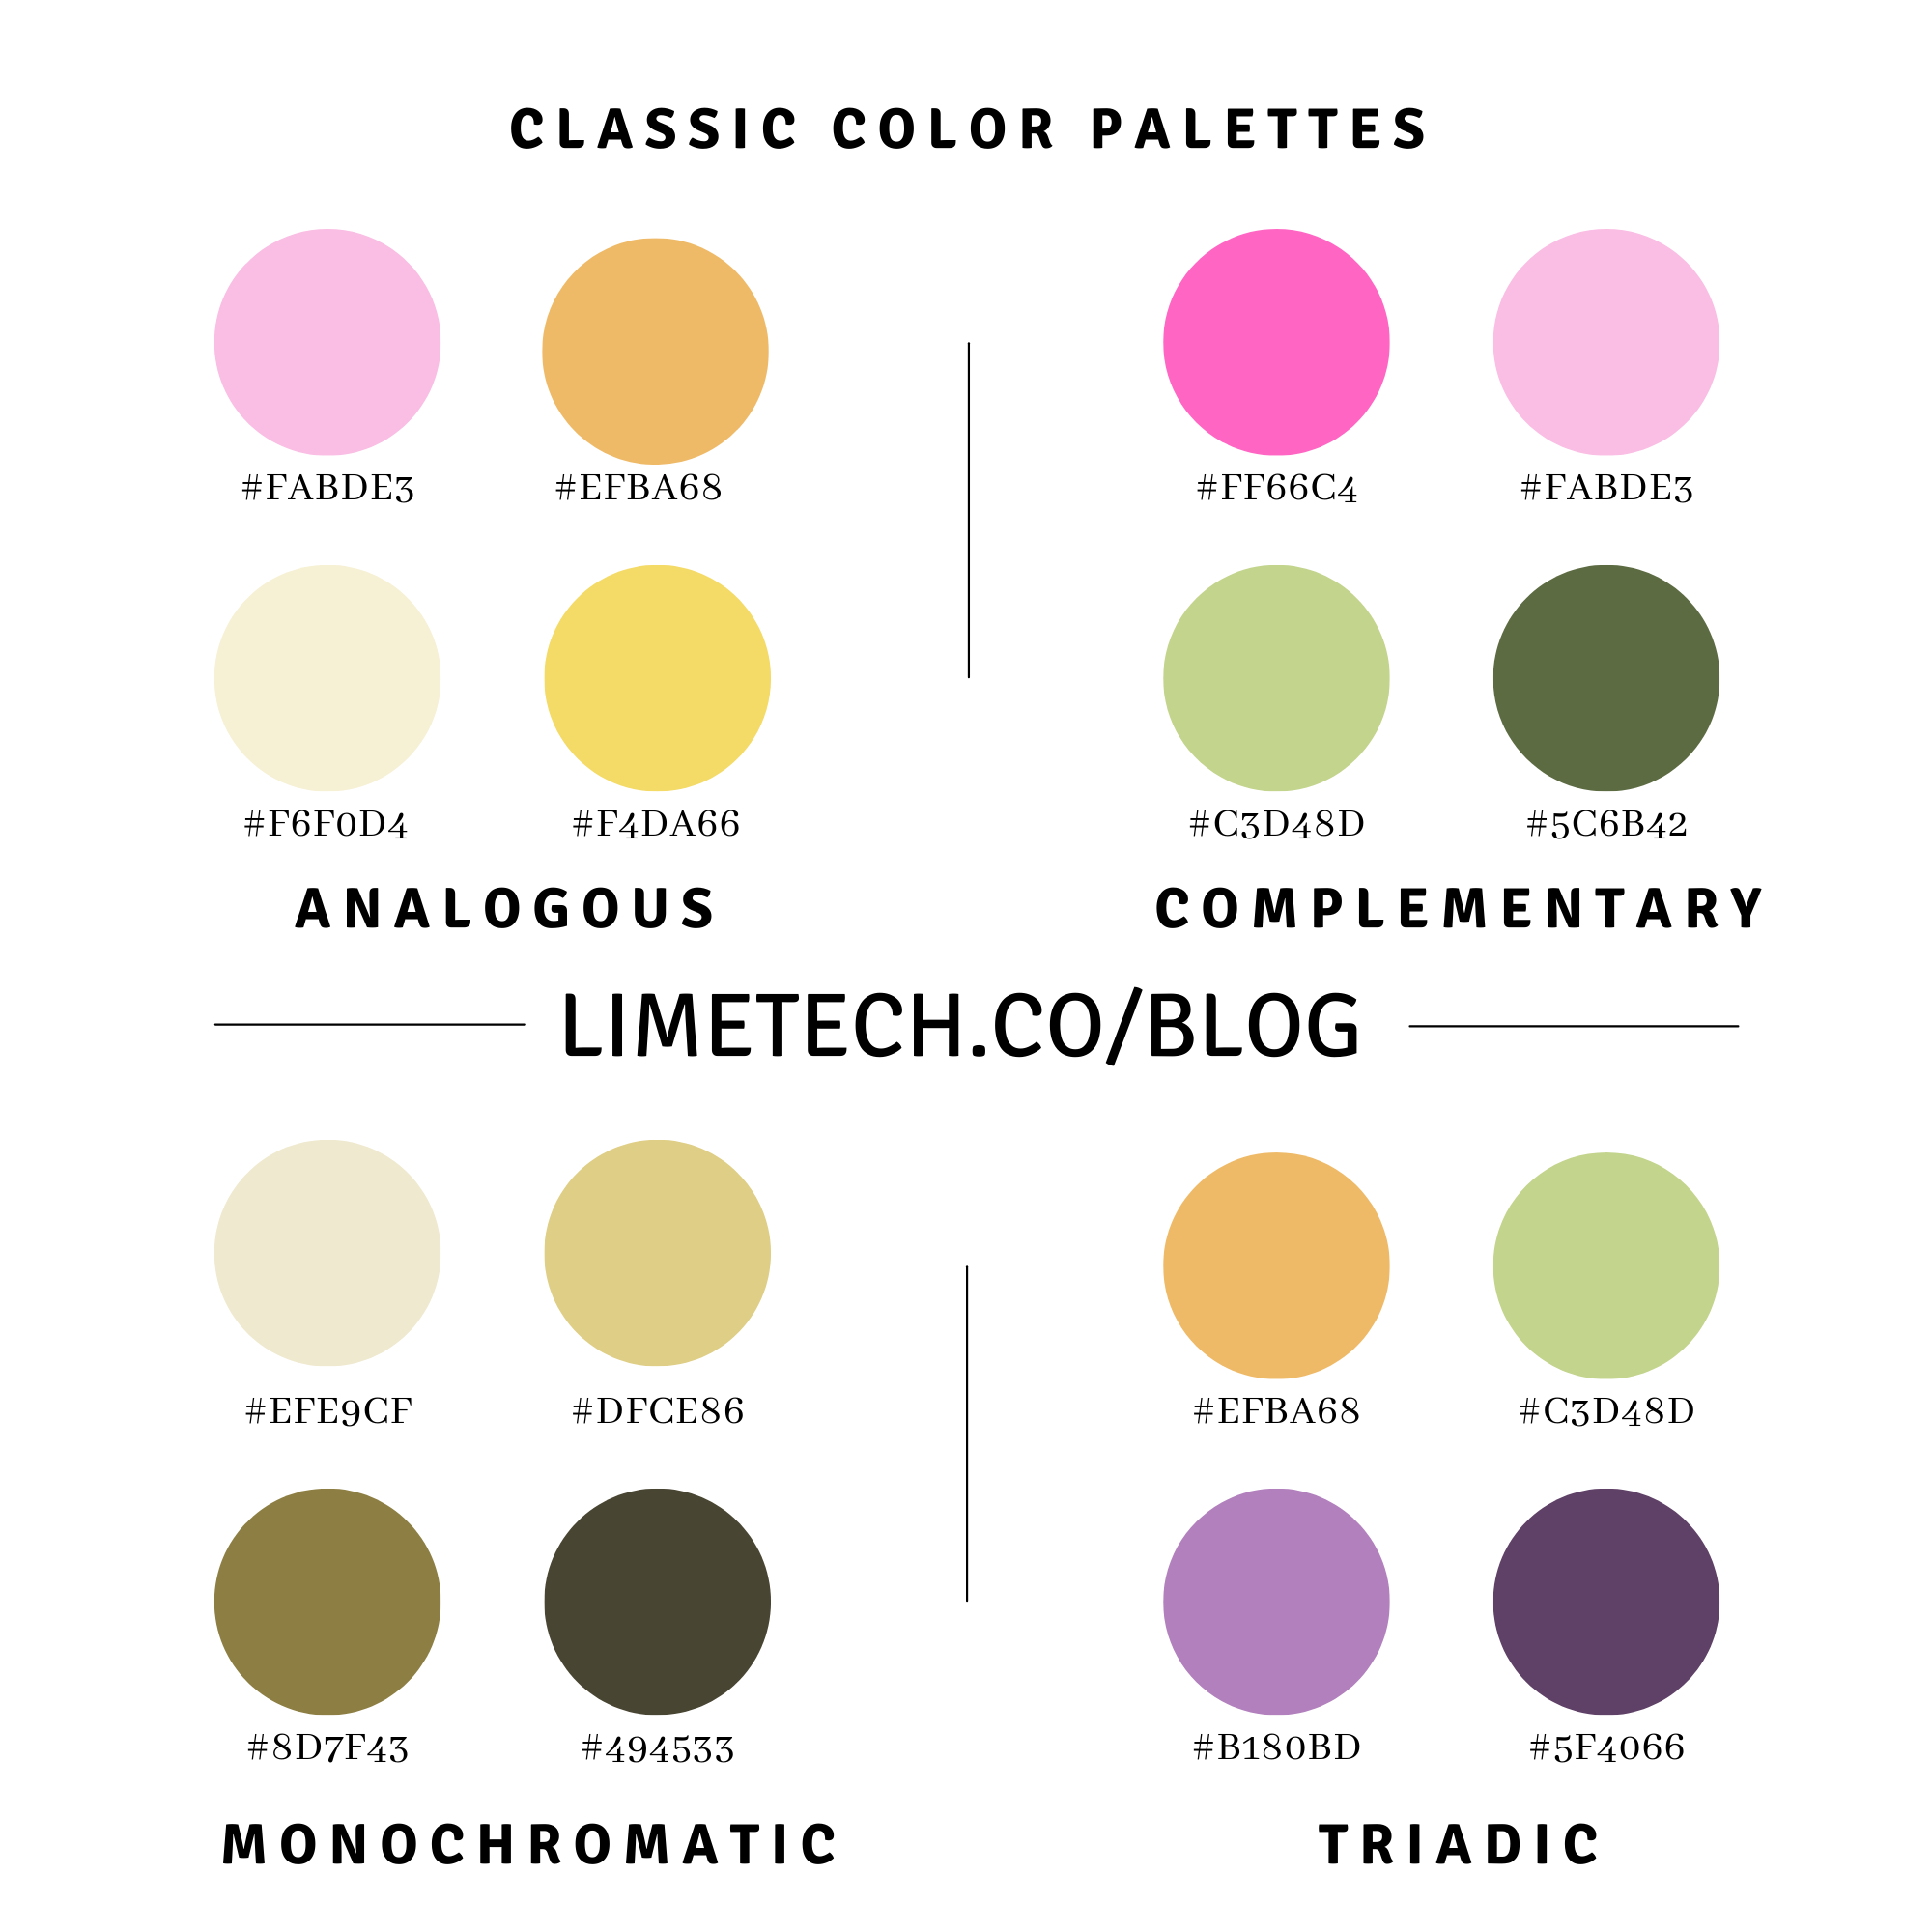 classic color palettes infographic showing analogous, complementary, monochromatic and triadic combinations